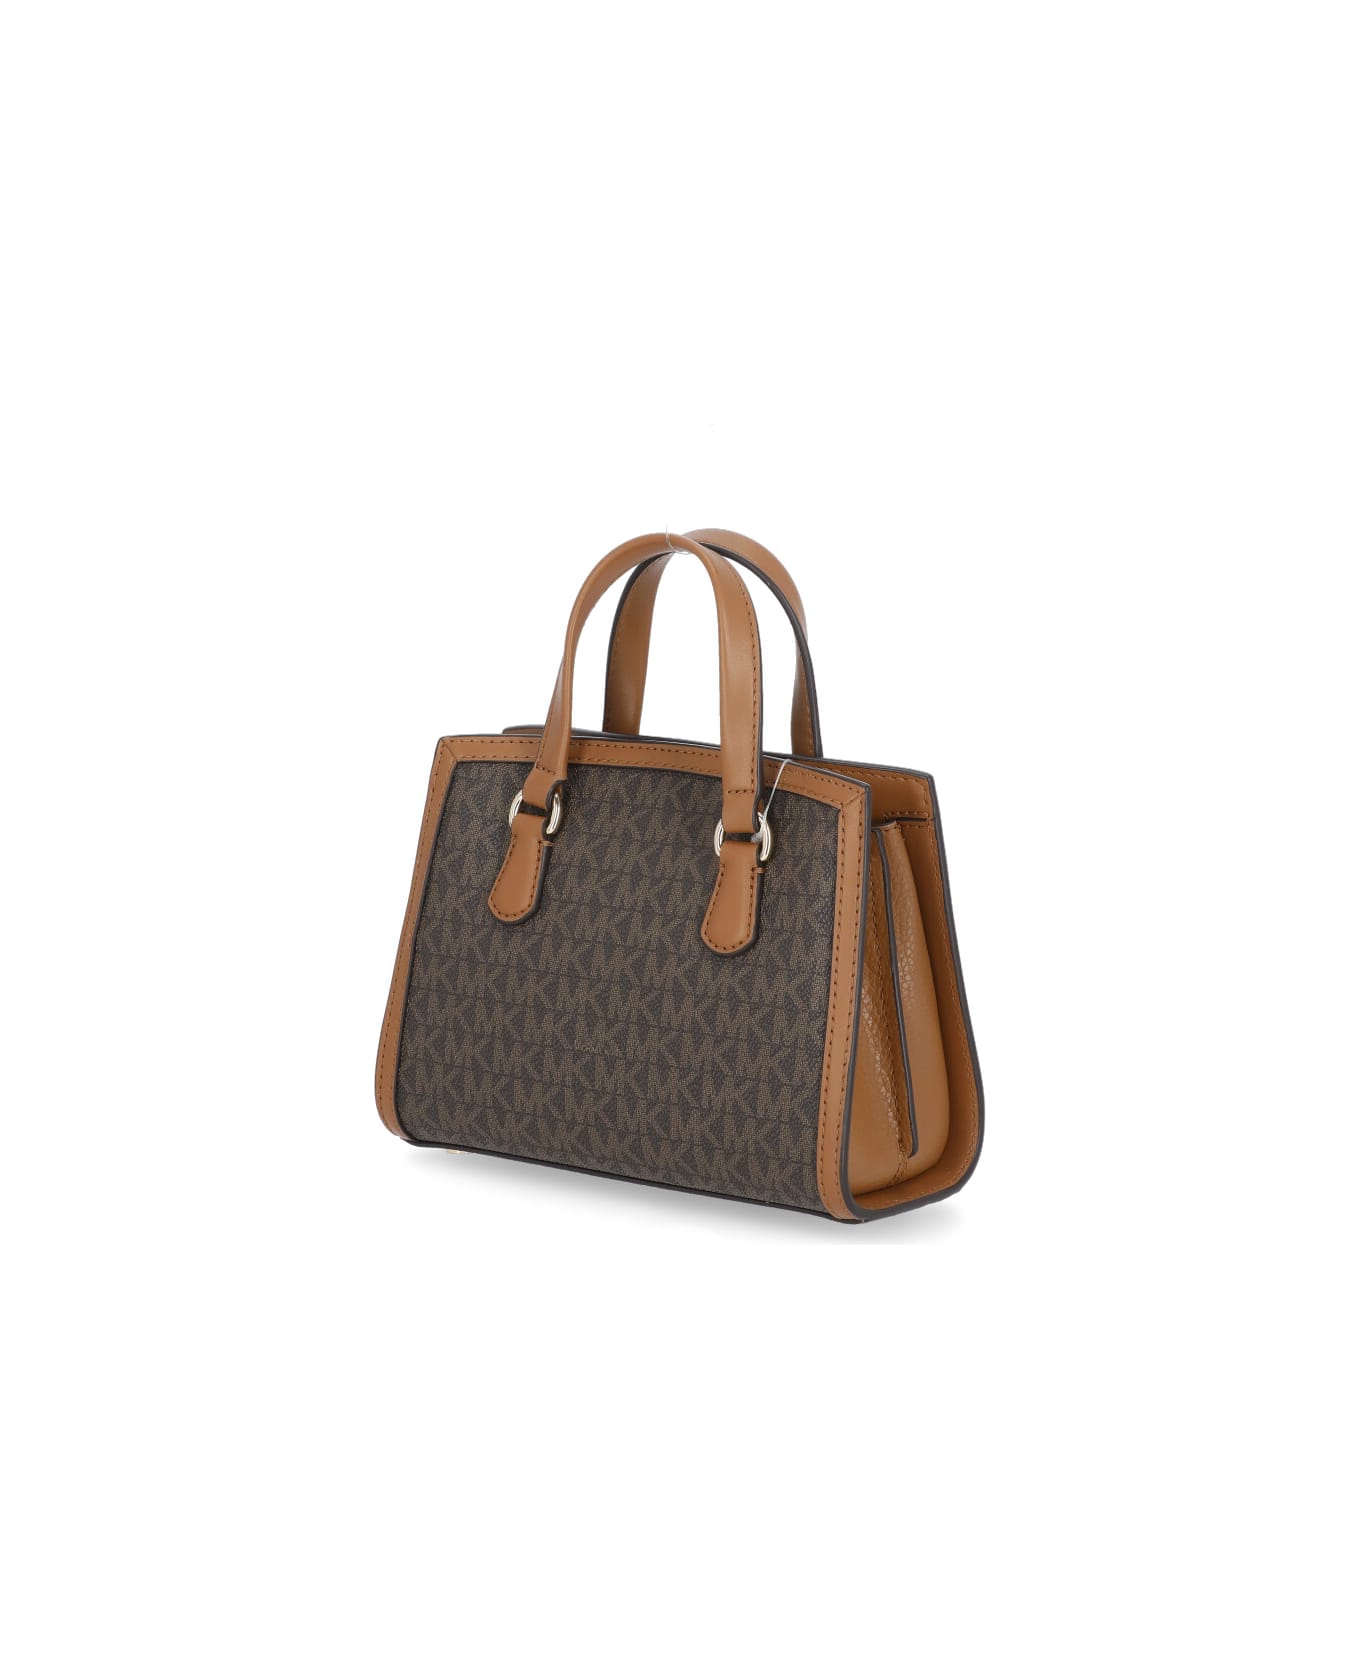 MICHAEL Michael Kors Logo Plaque Chain-linked Tote Bag - Brown トートバッグ